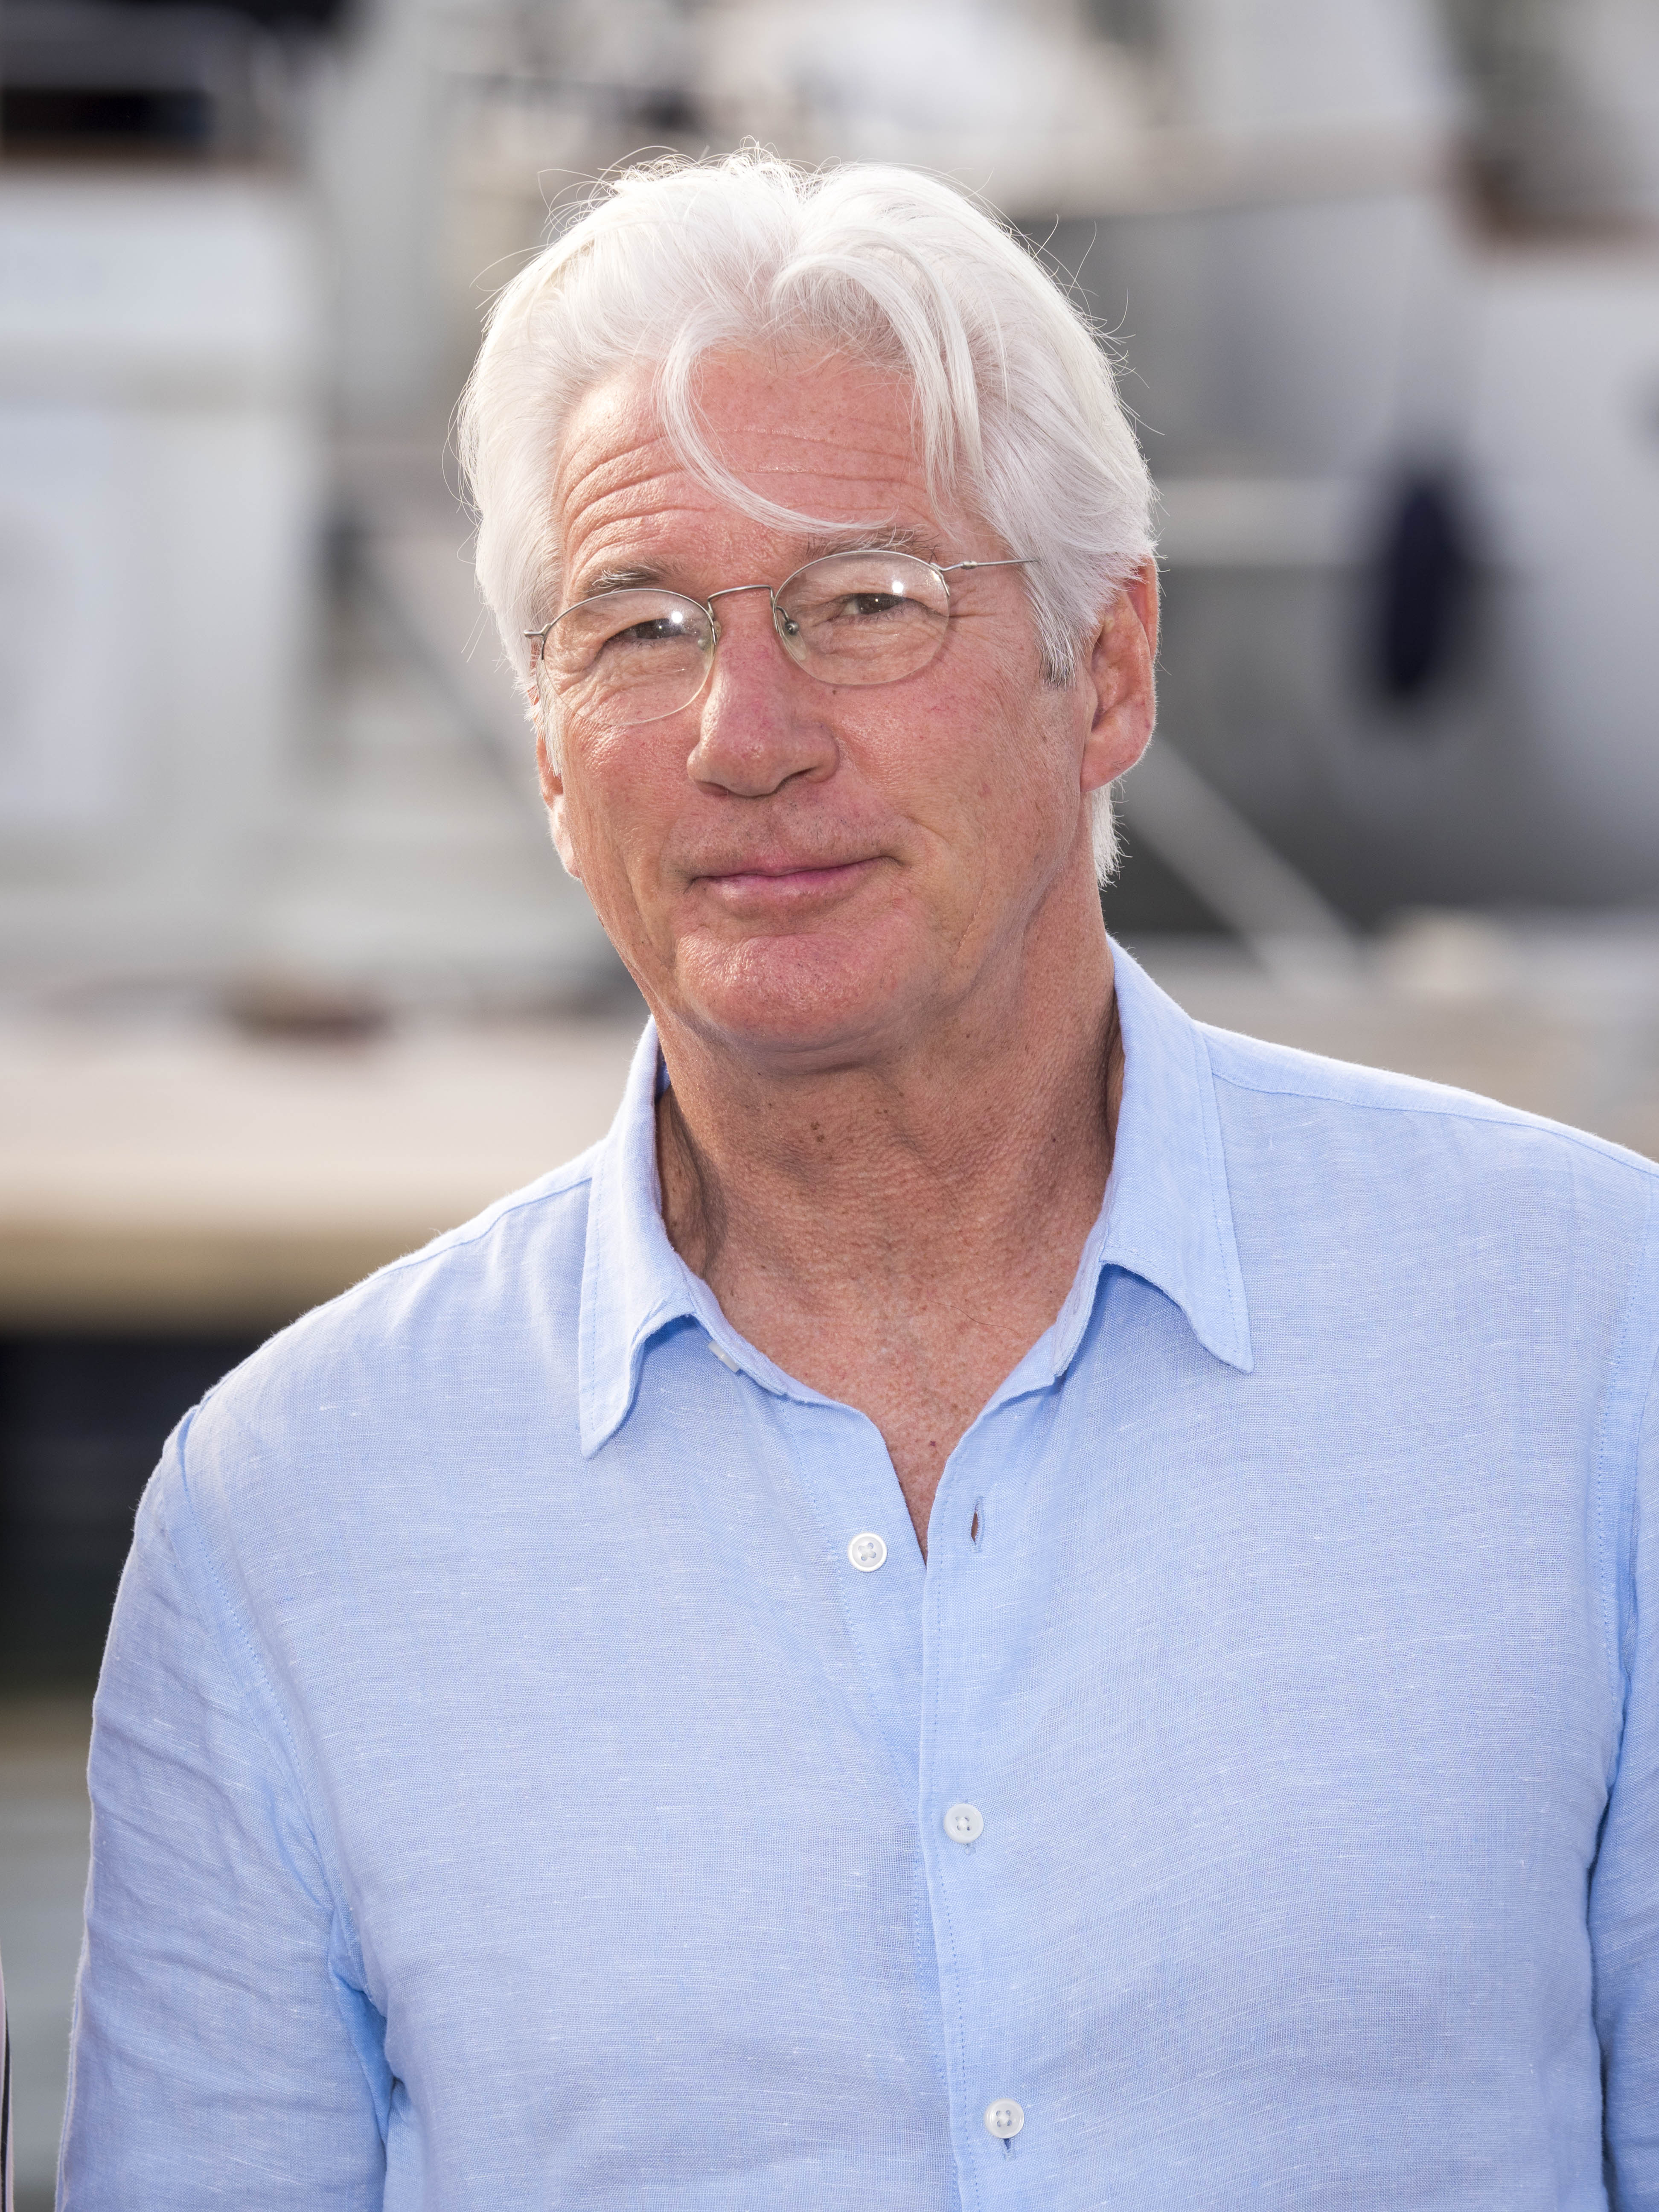  Richard Gere attendsthe Motherfatherson photocall as part of the MIPCOM 2018 on October 15, 2018 in Cannes, France. | Source: Getty Images